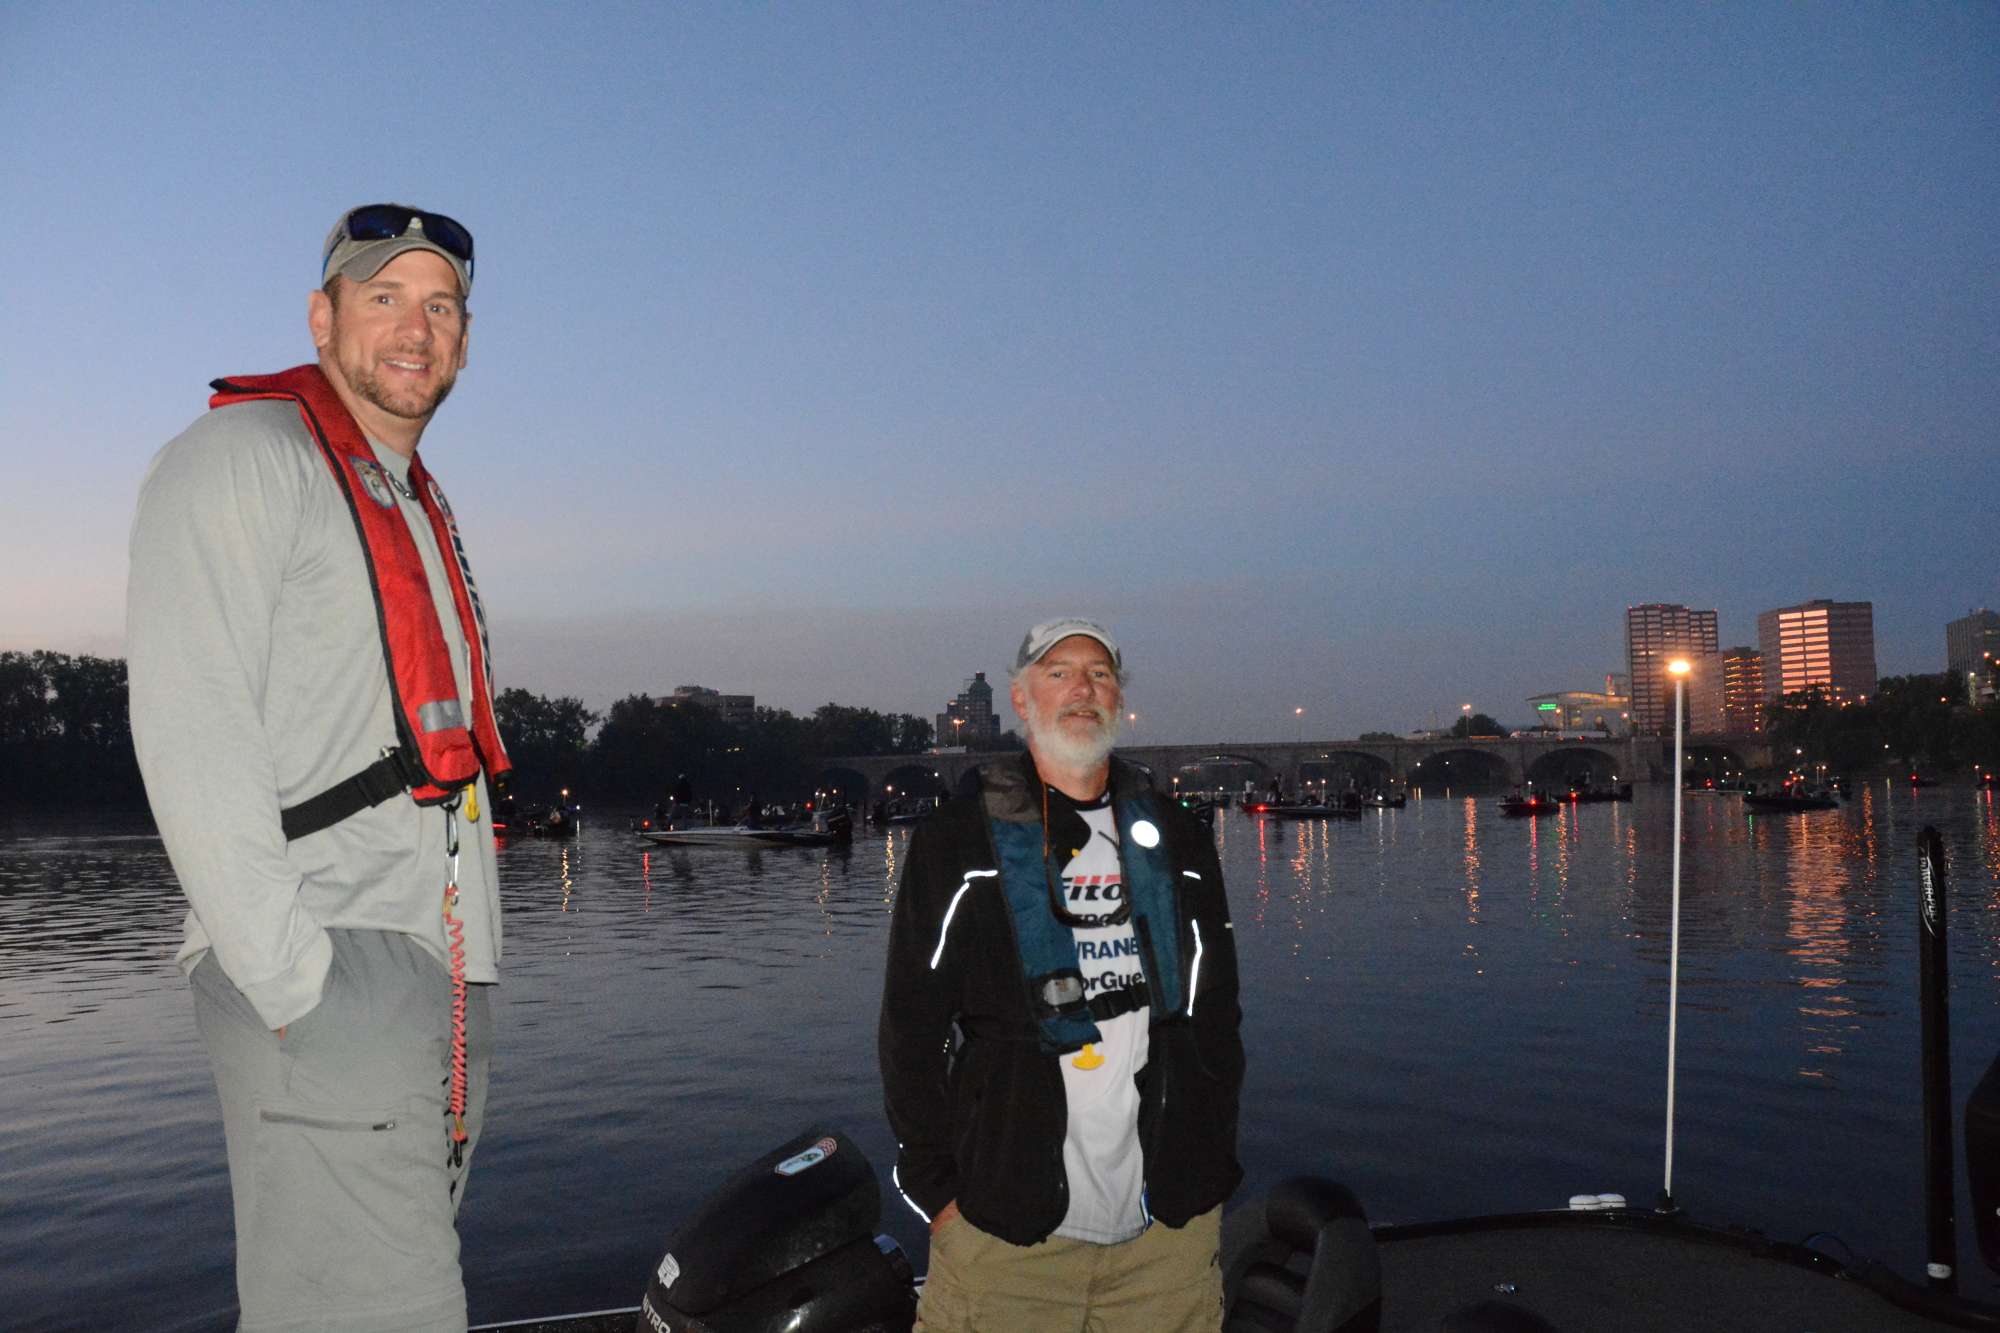 Steven Pickard of New York leads the tournament. Today, he'll be fishing with Alan Krause of Massachusetts.